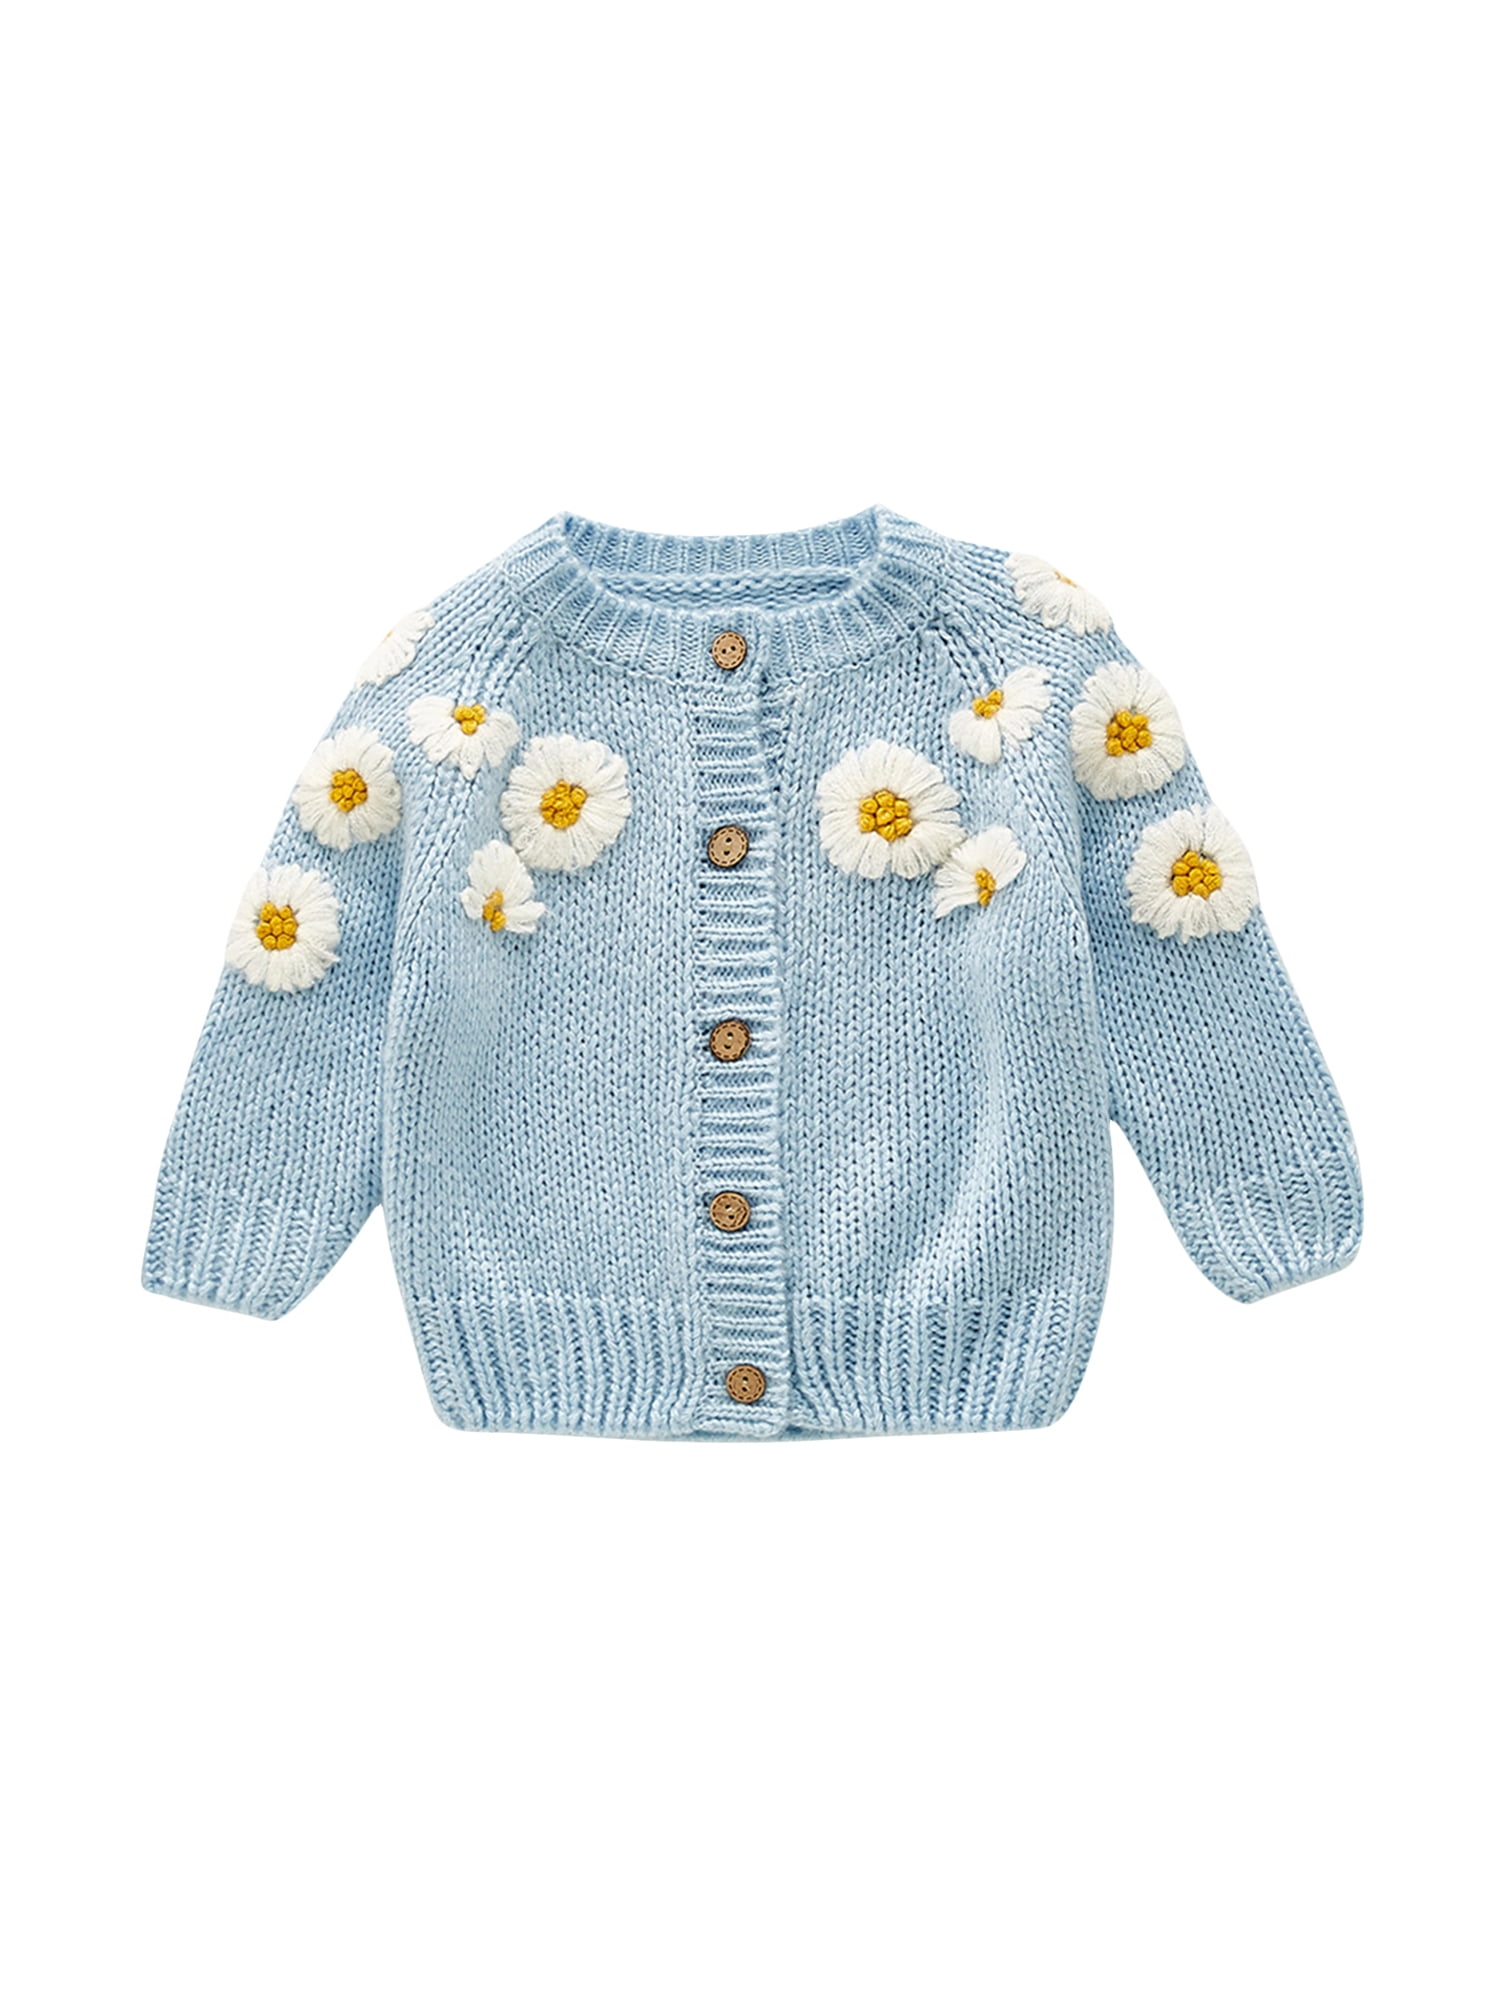 Toddlers Baby Girls Clothes Floral Knit Cardigan Sweaters Long Sleeve  Button Daisy Sweater Open Front Coat Fall